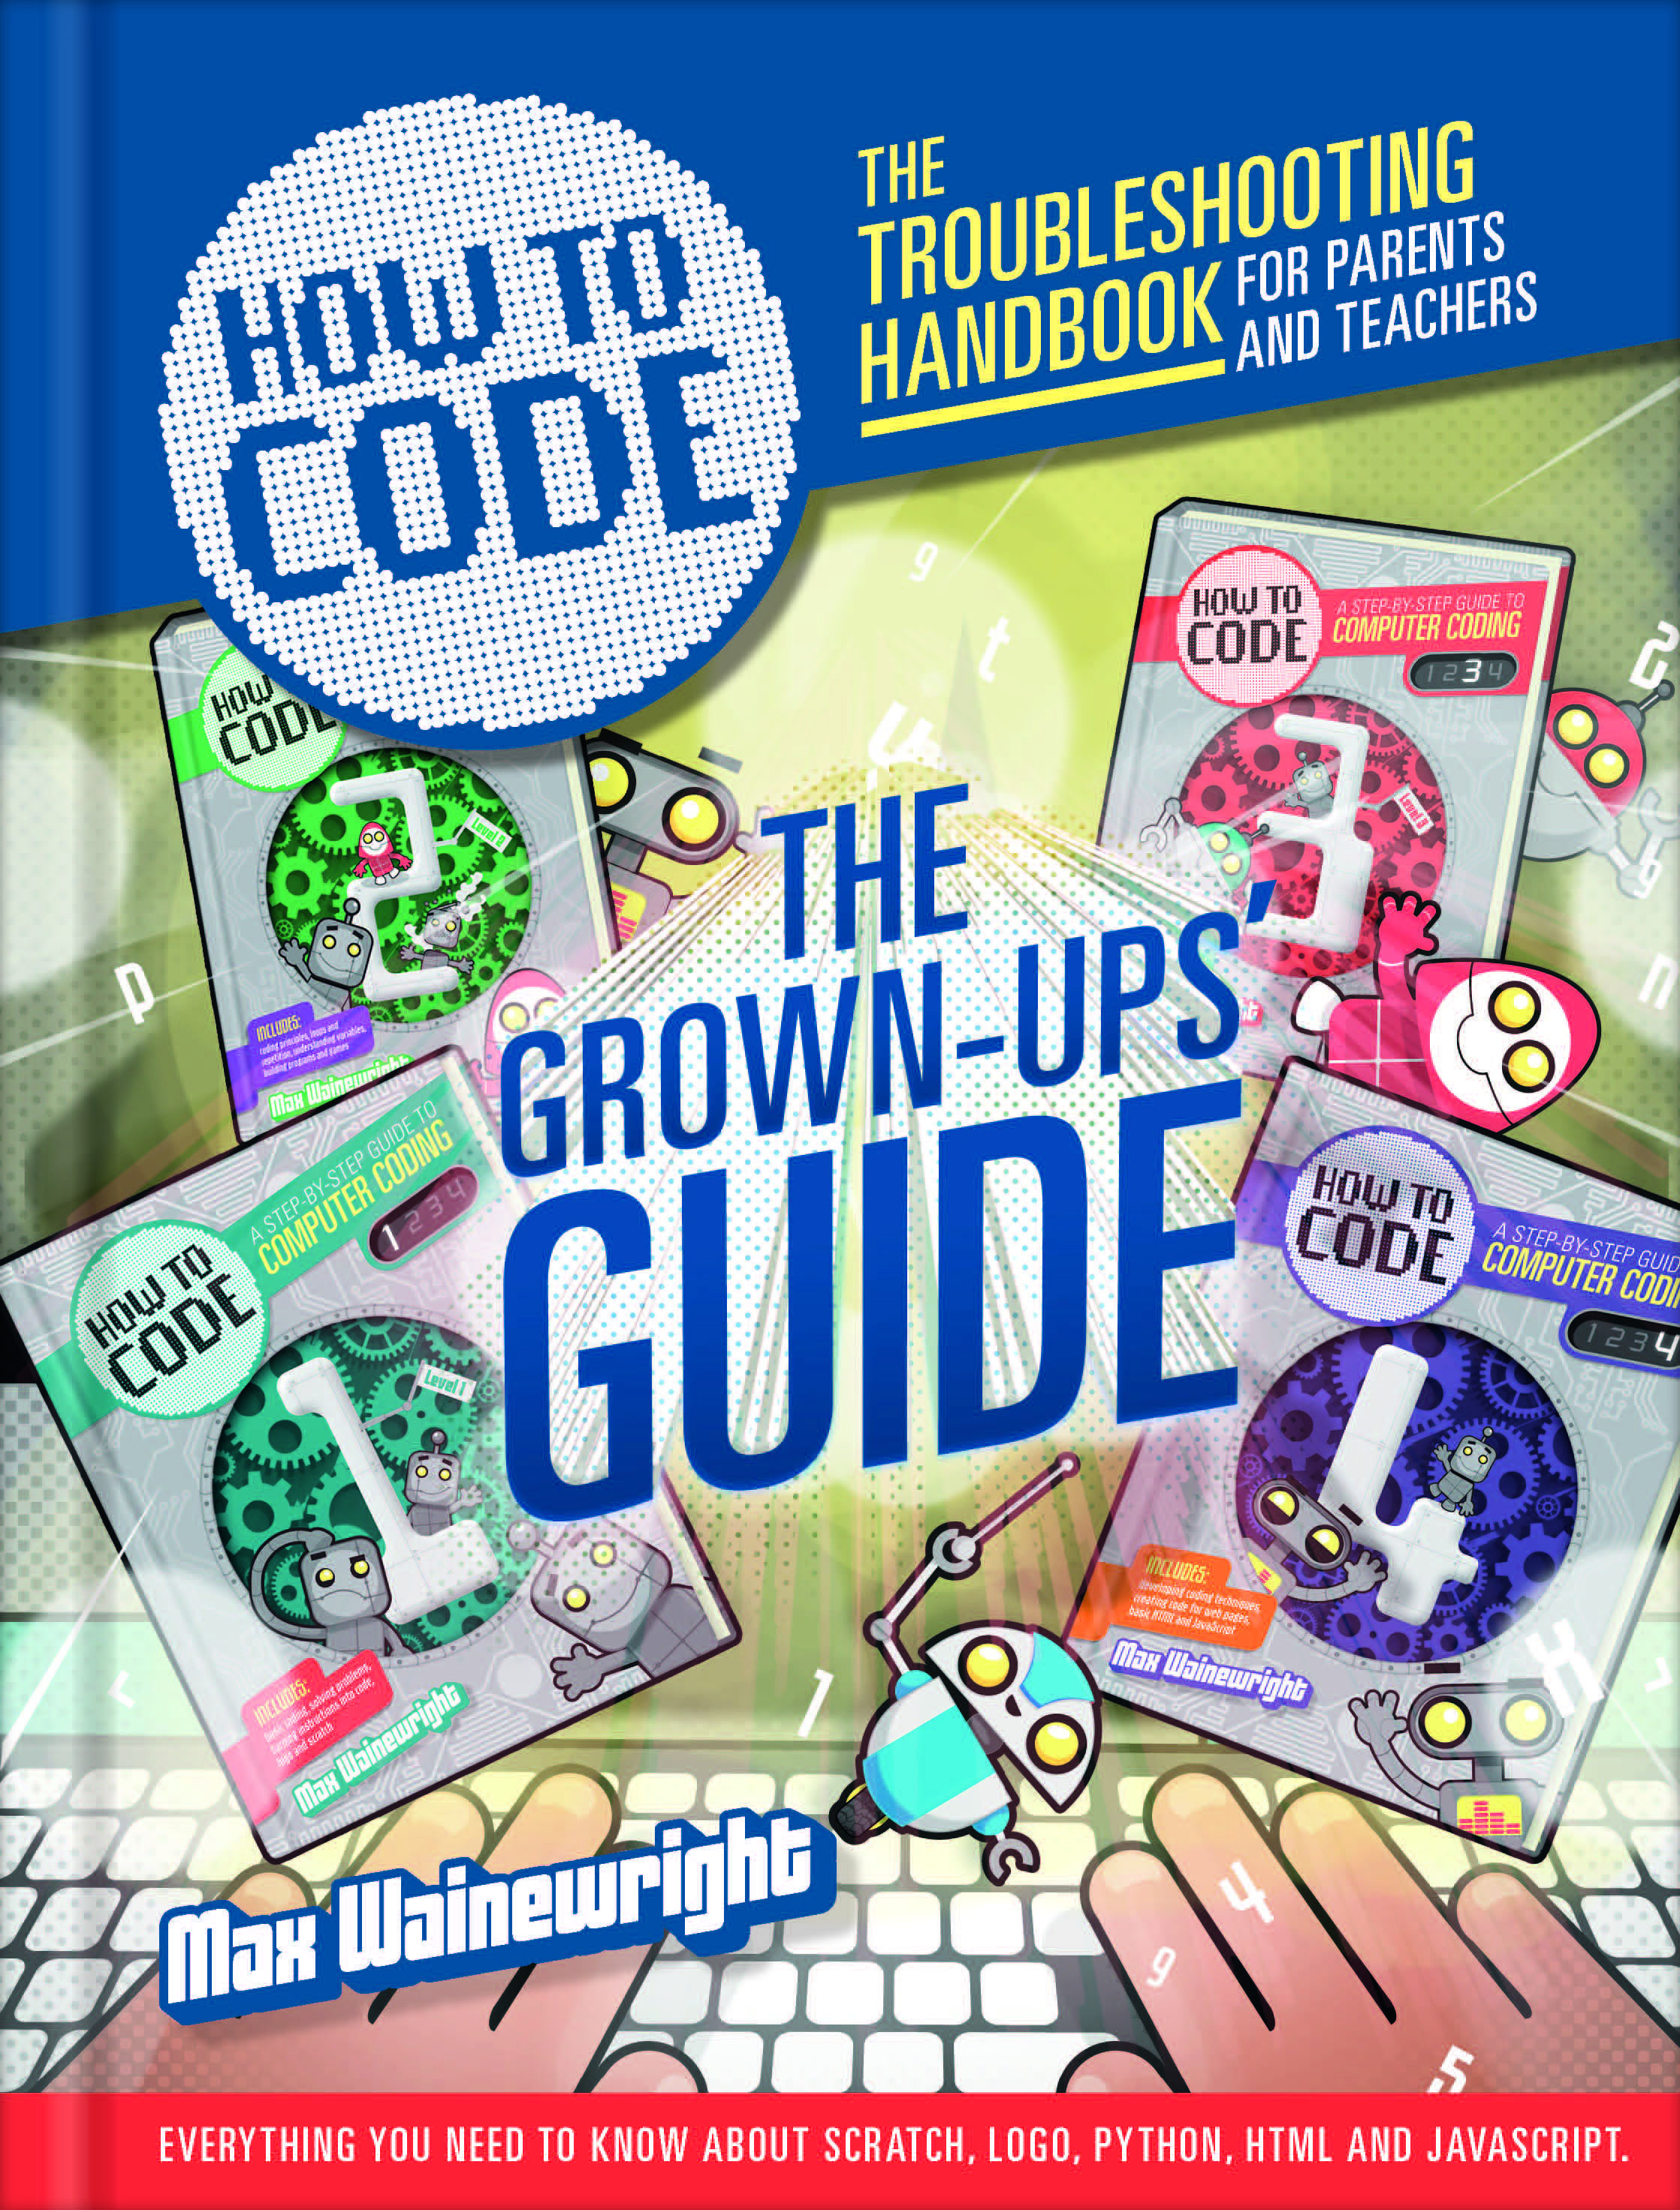 How To Code The Grown Ups Guide The Troubleshooting Handbook For Parents And Teachers